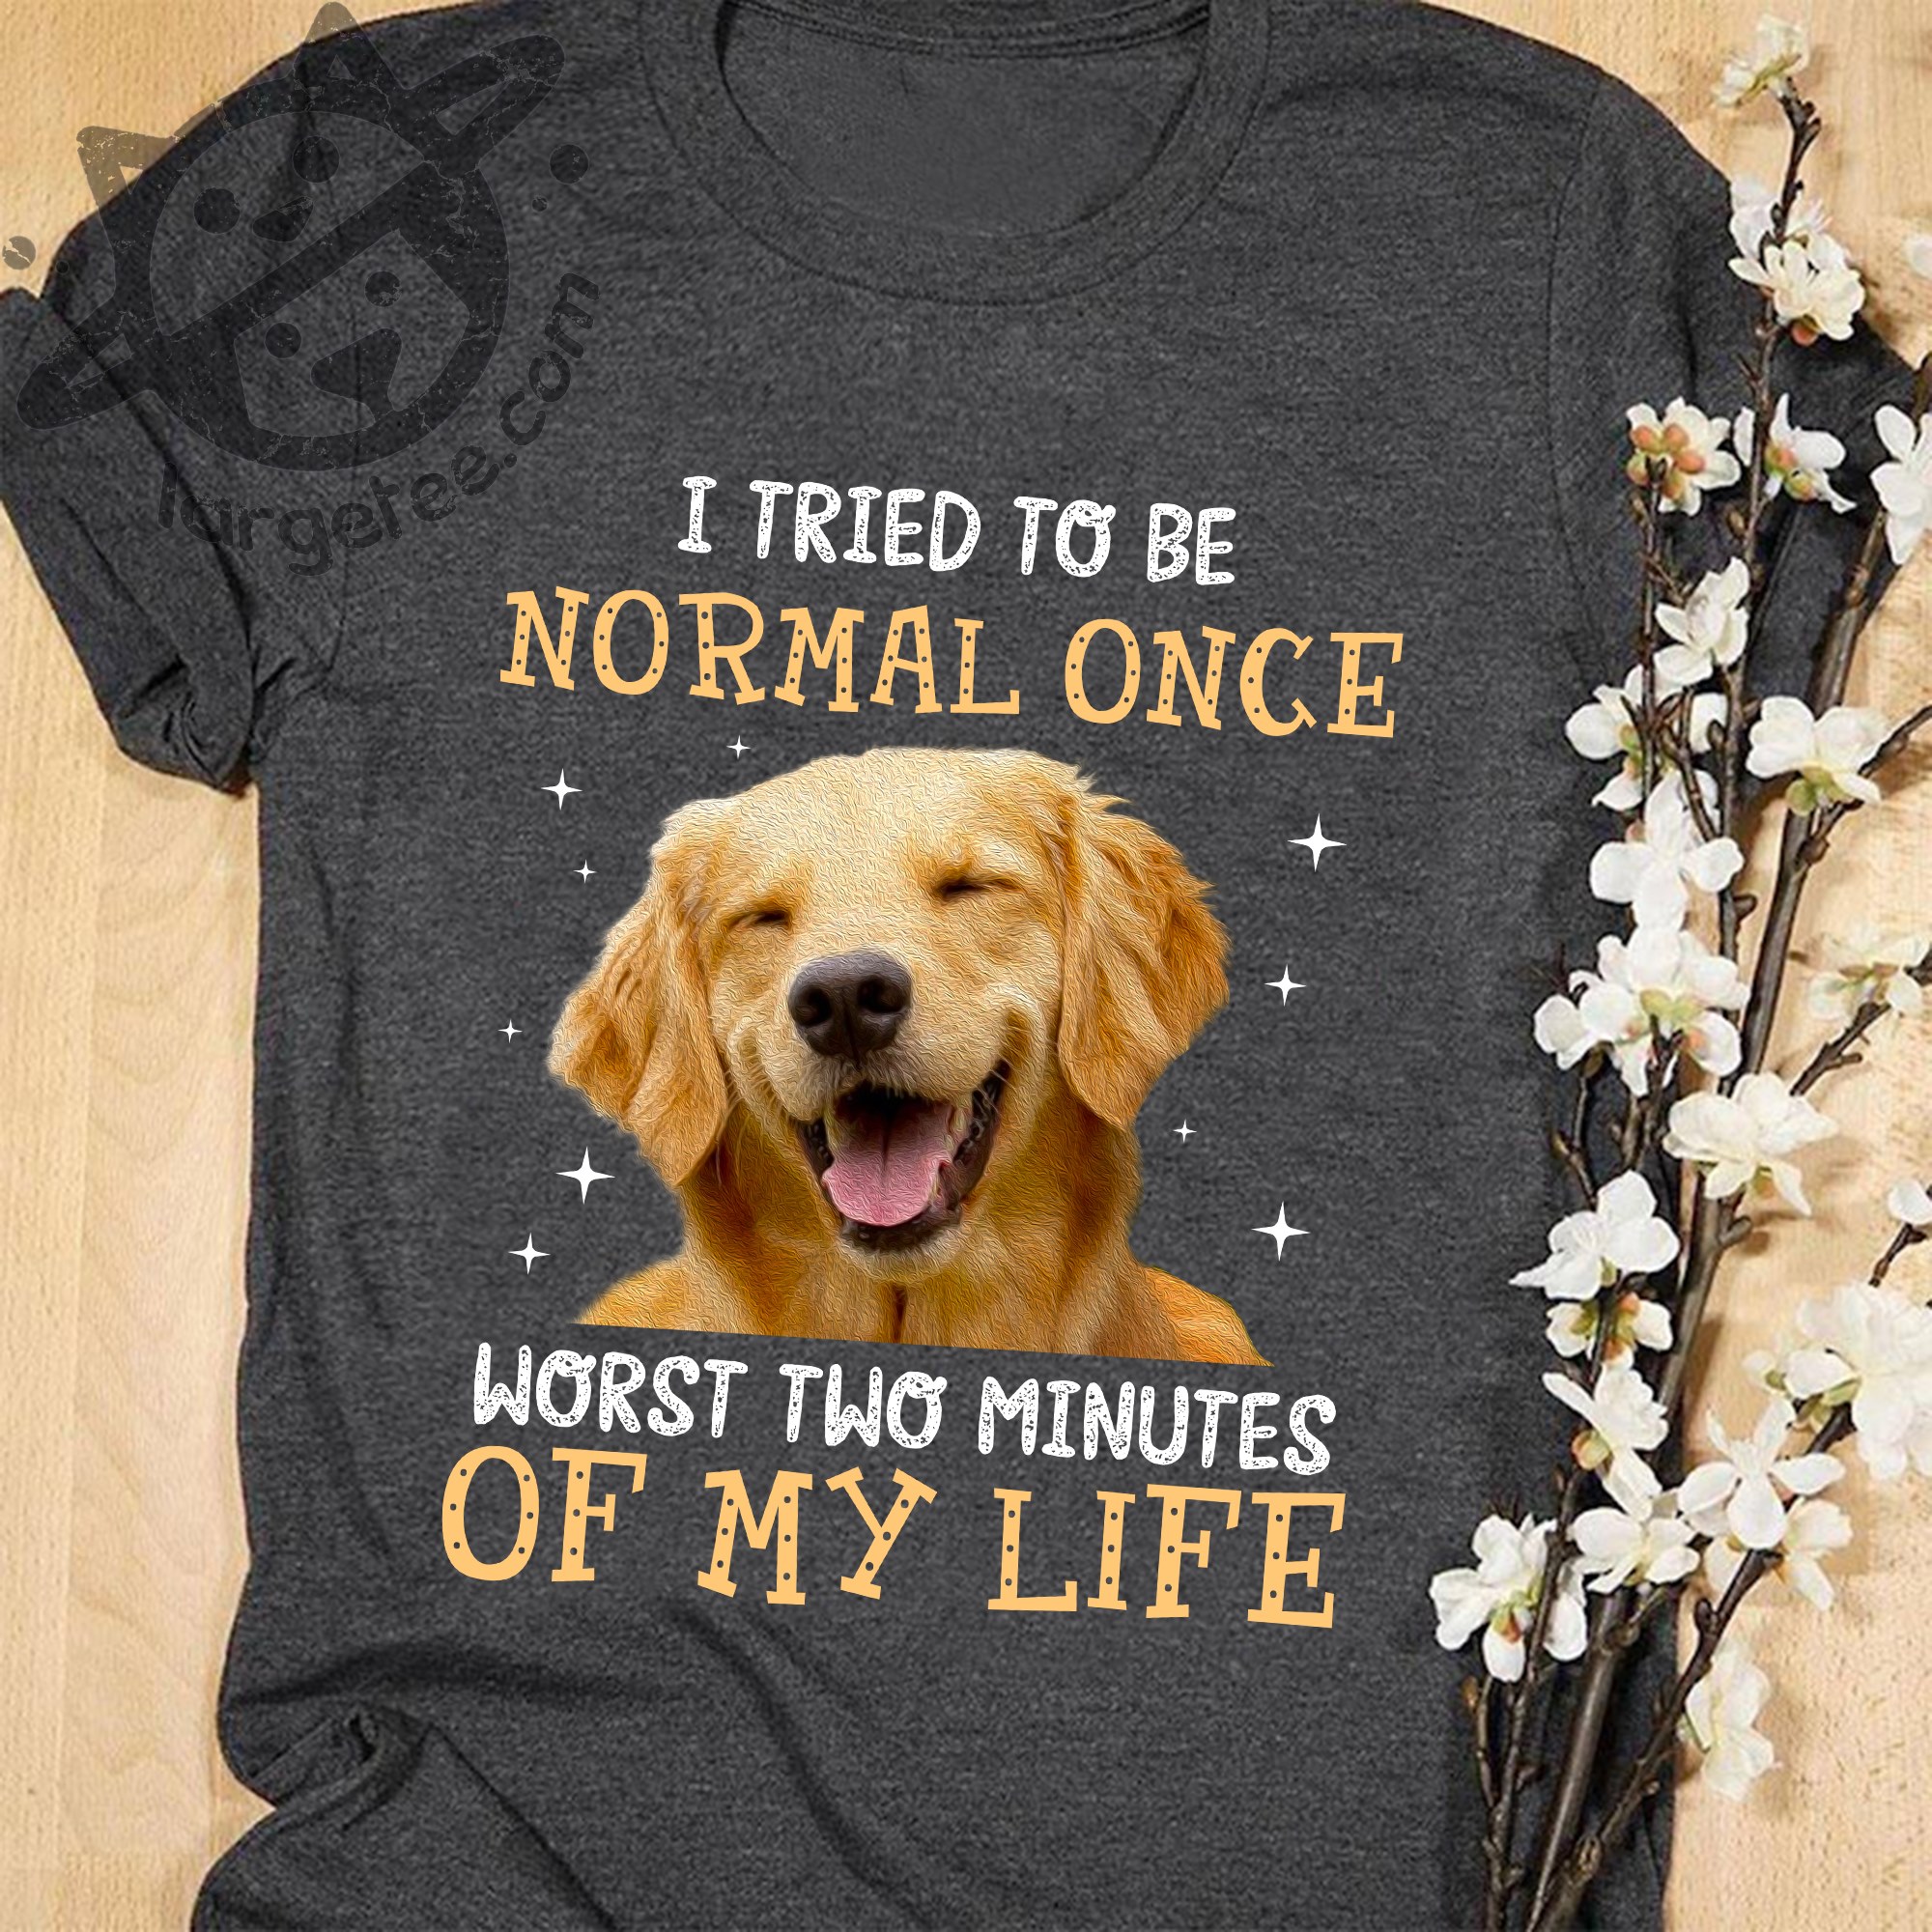 I tried to be normal once worst two minutes of my life - Golden dog